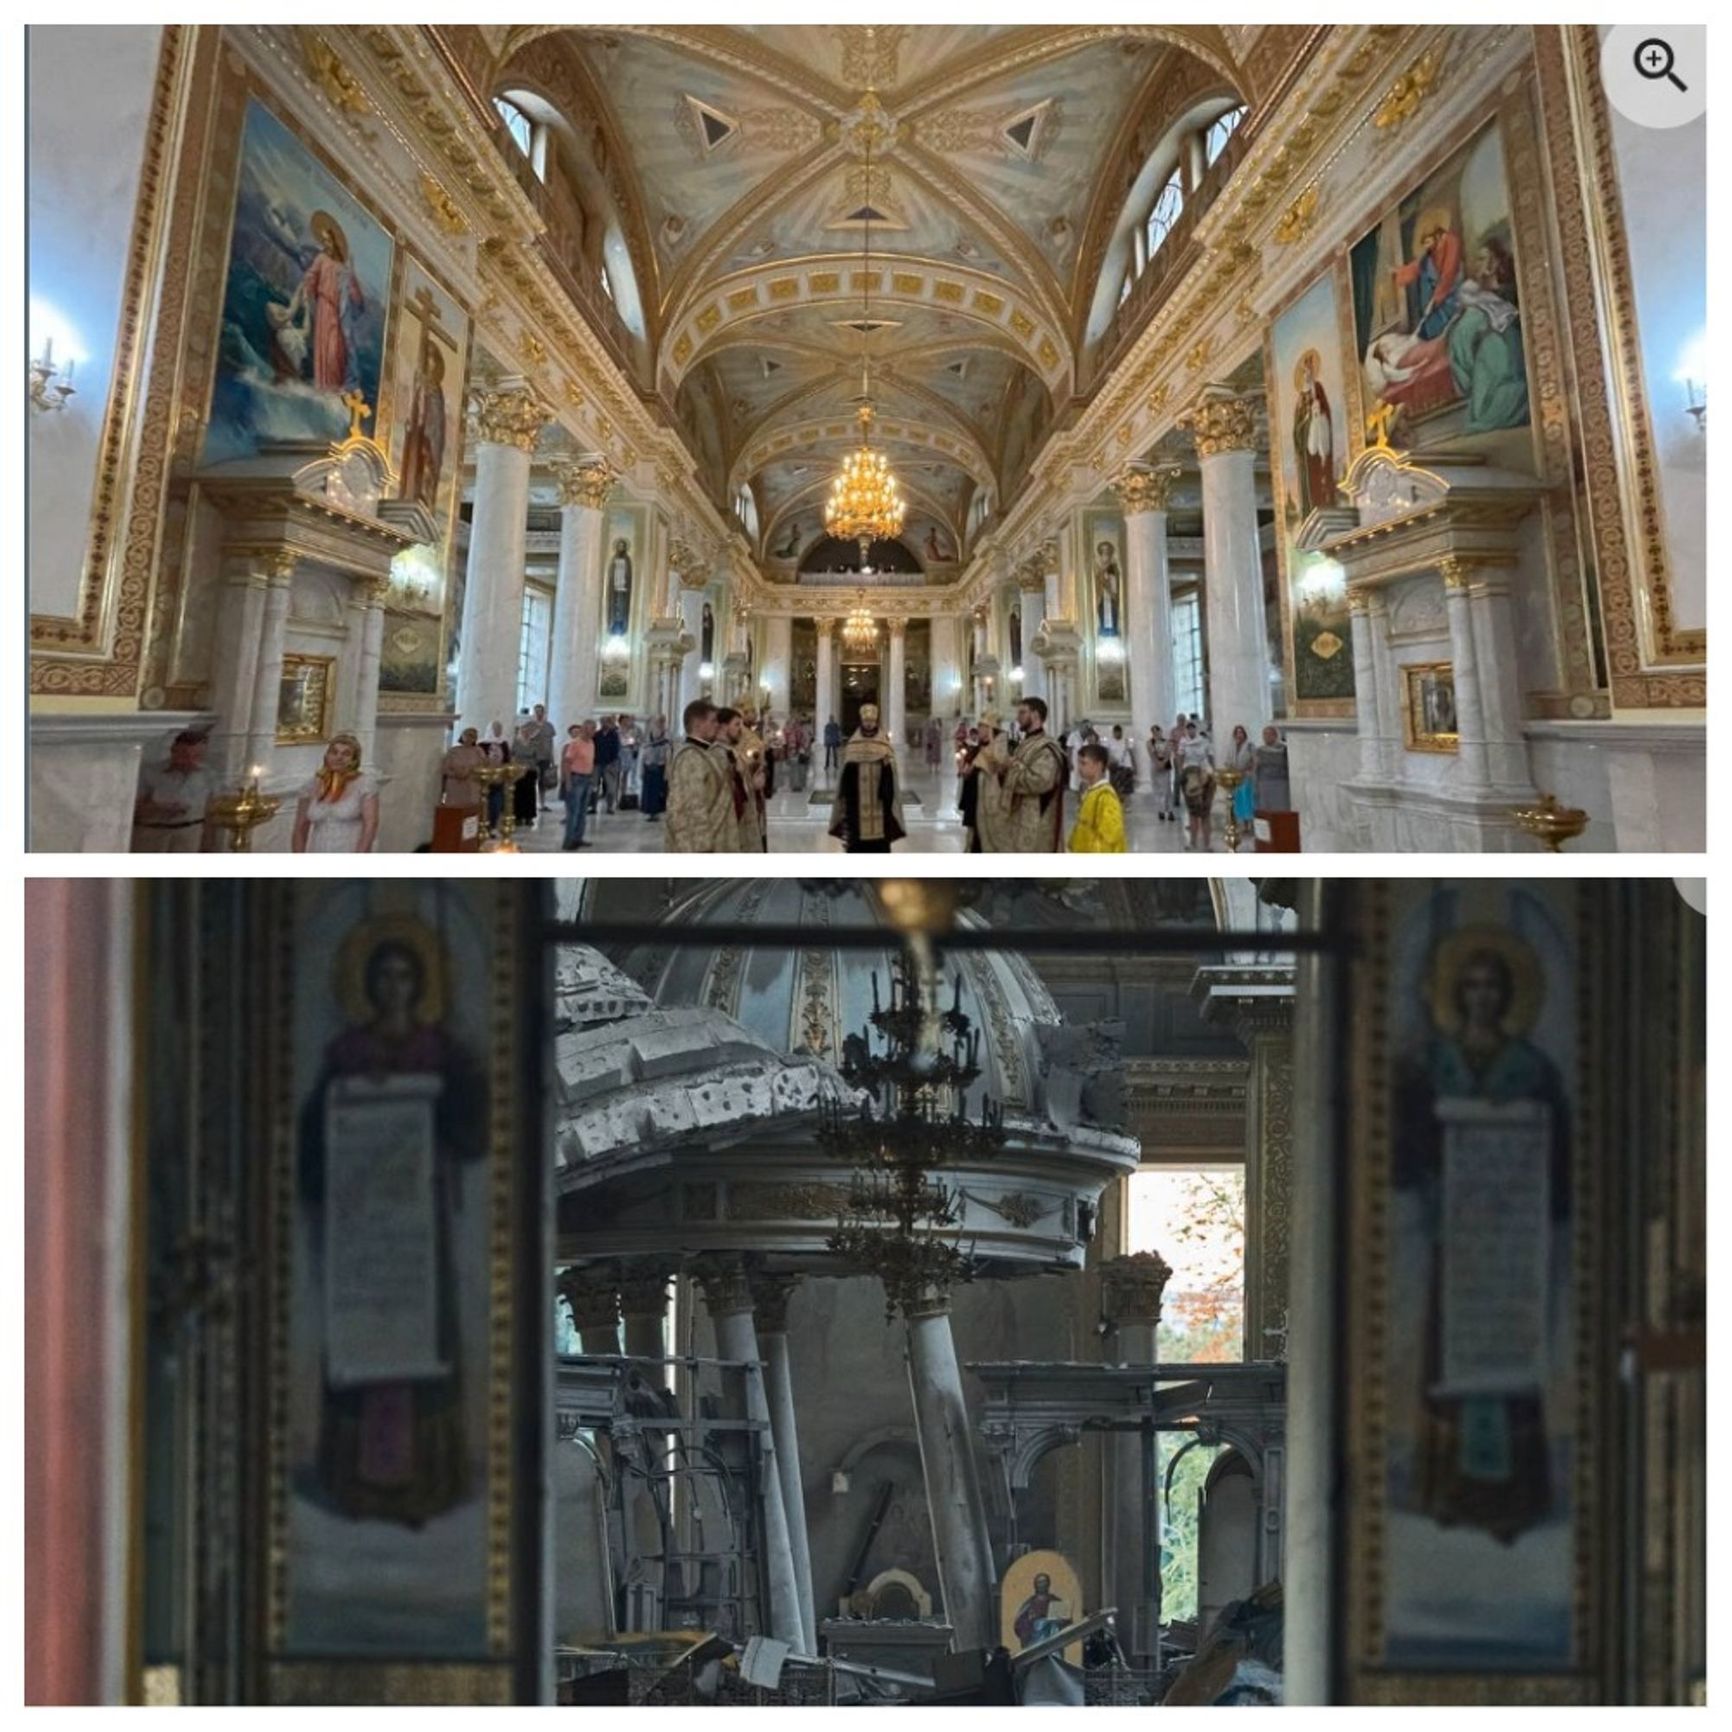 The Transfiguration Cathedral before and after the Russian attack